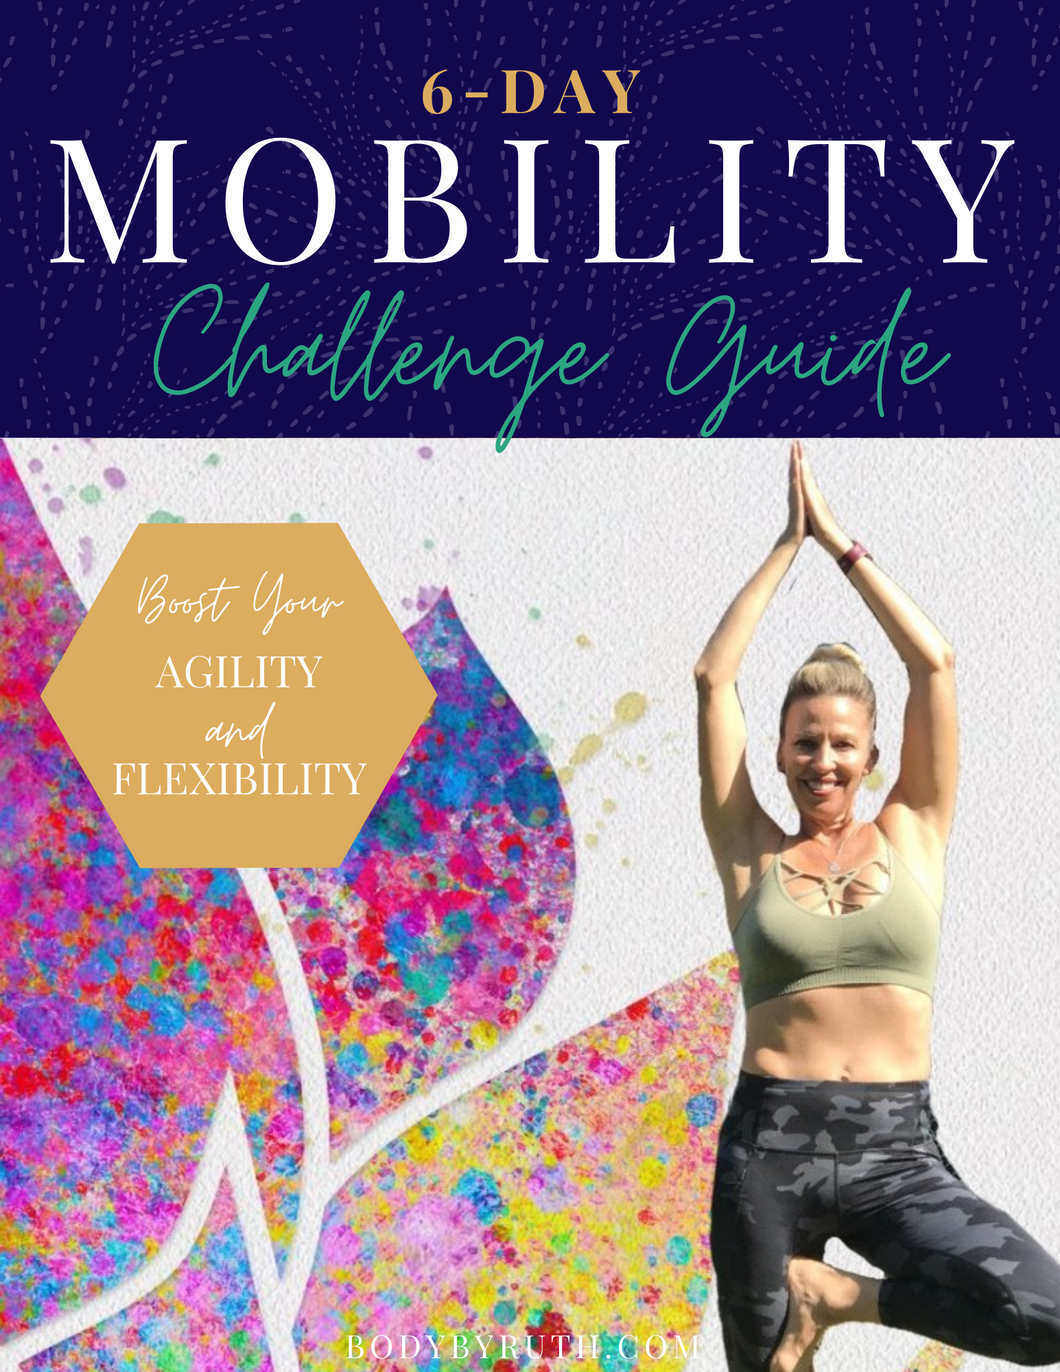 6 day Mobility Challenge Guide